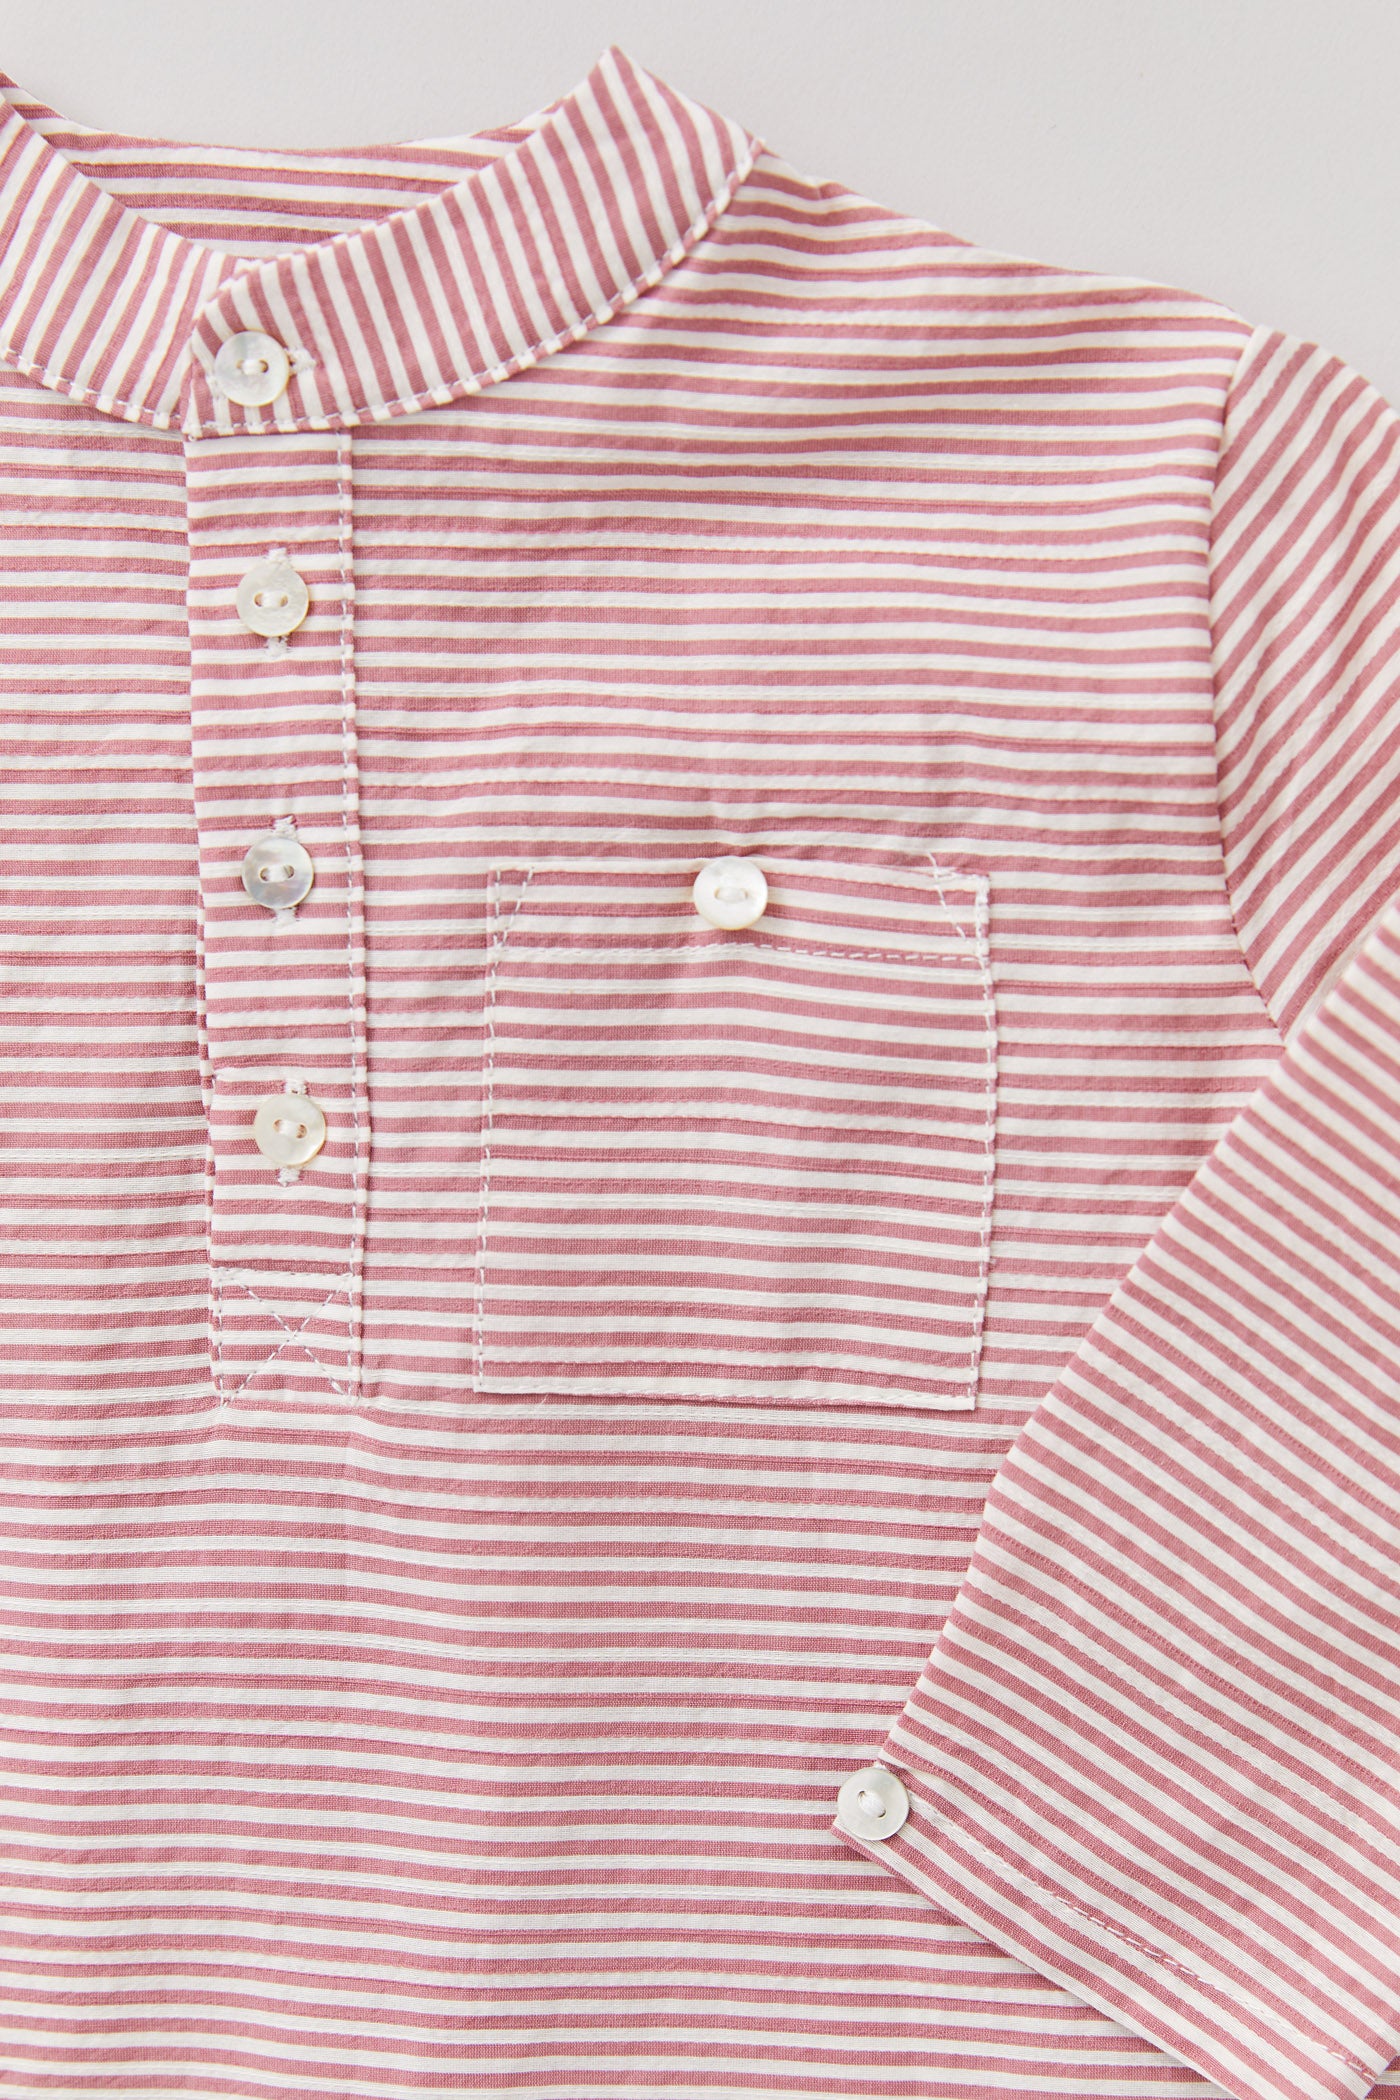 Apple Shirt in Red White Stripes - Designed by Ingrid Lewis - Strawberries & Cream